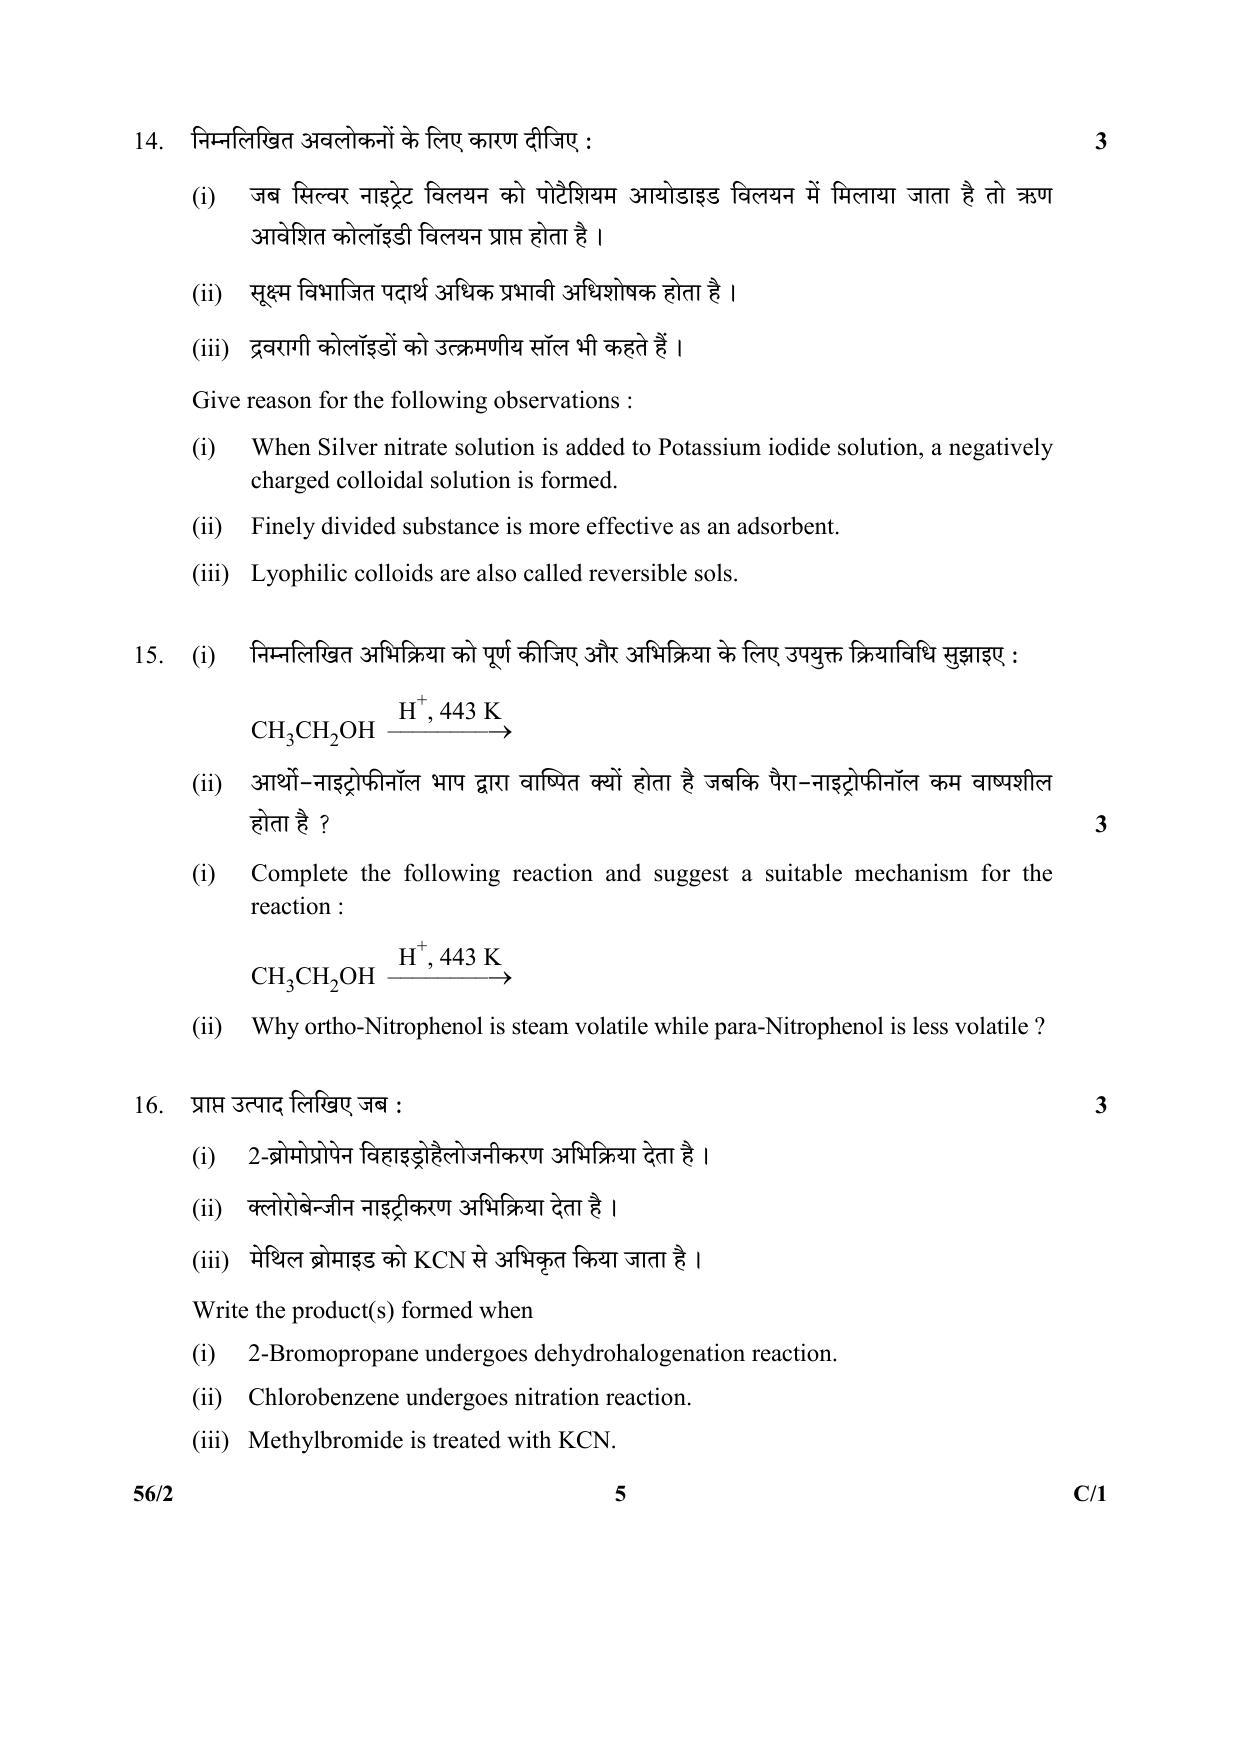 CBSE Class 12 56-2 (Chemistry) 2018 Compartment Question Paper - Page 5